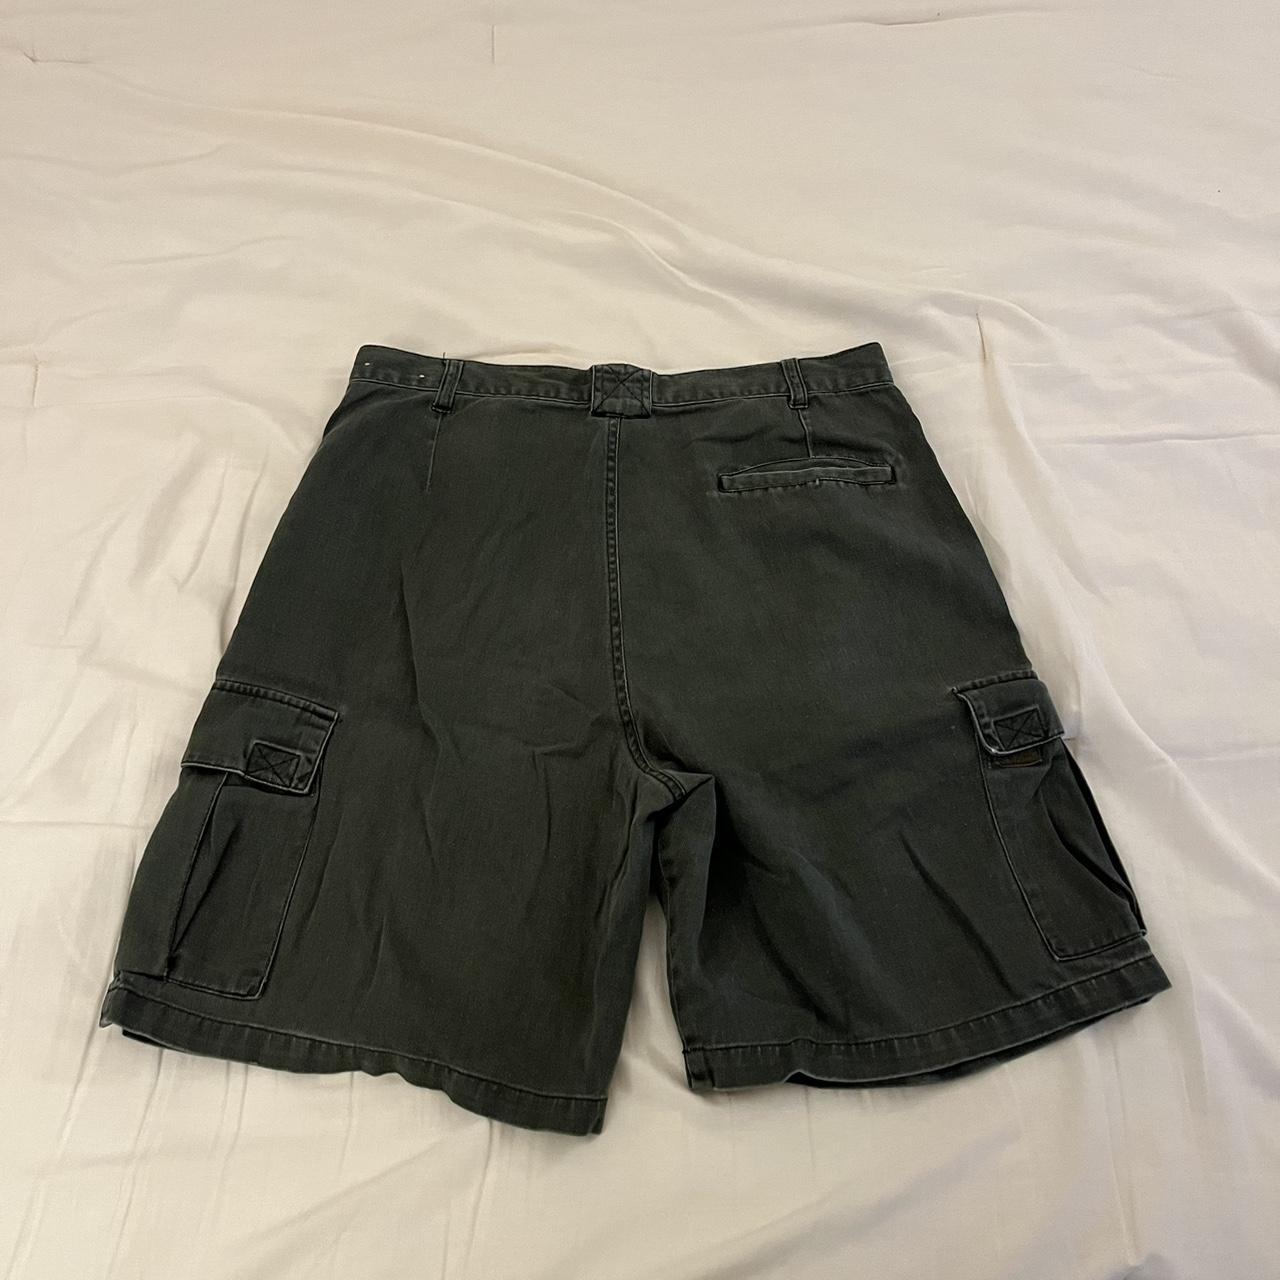 Vintage faded glory cargo shorts , Preowned comes in